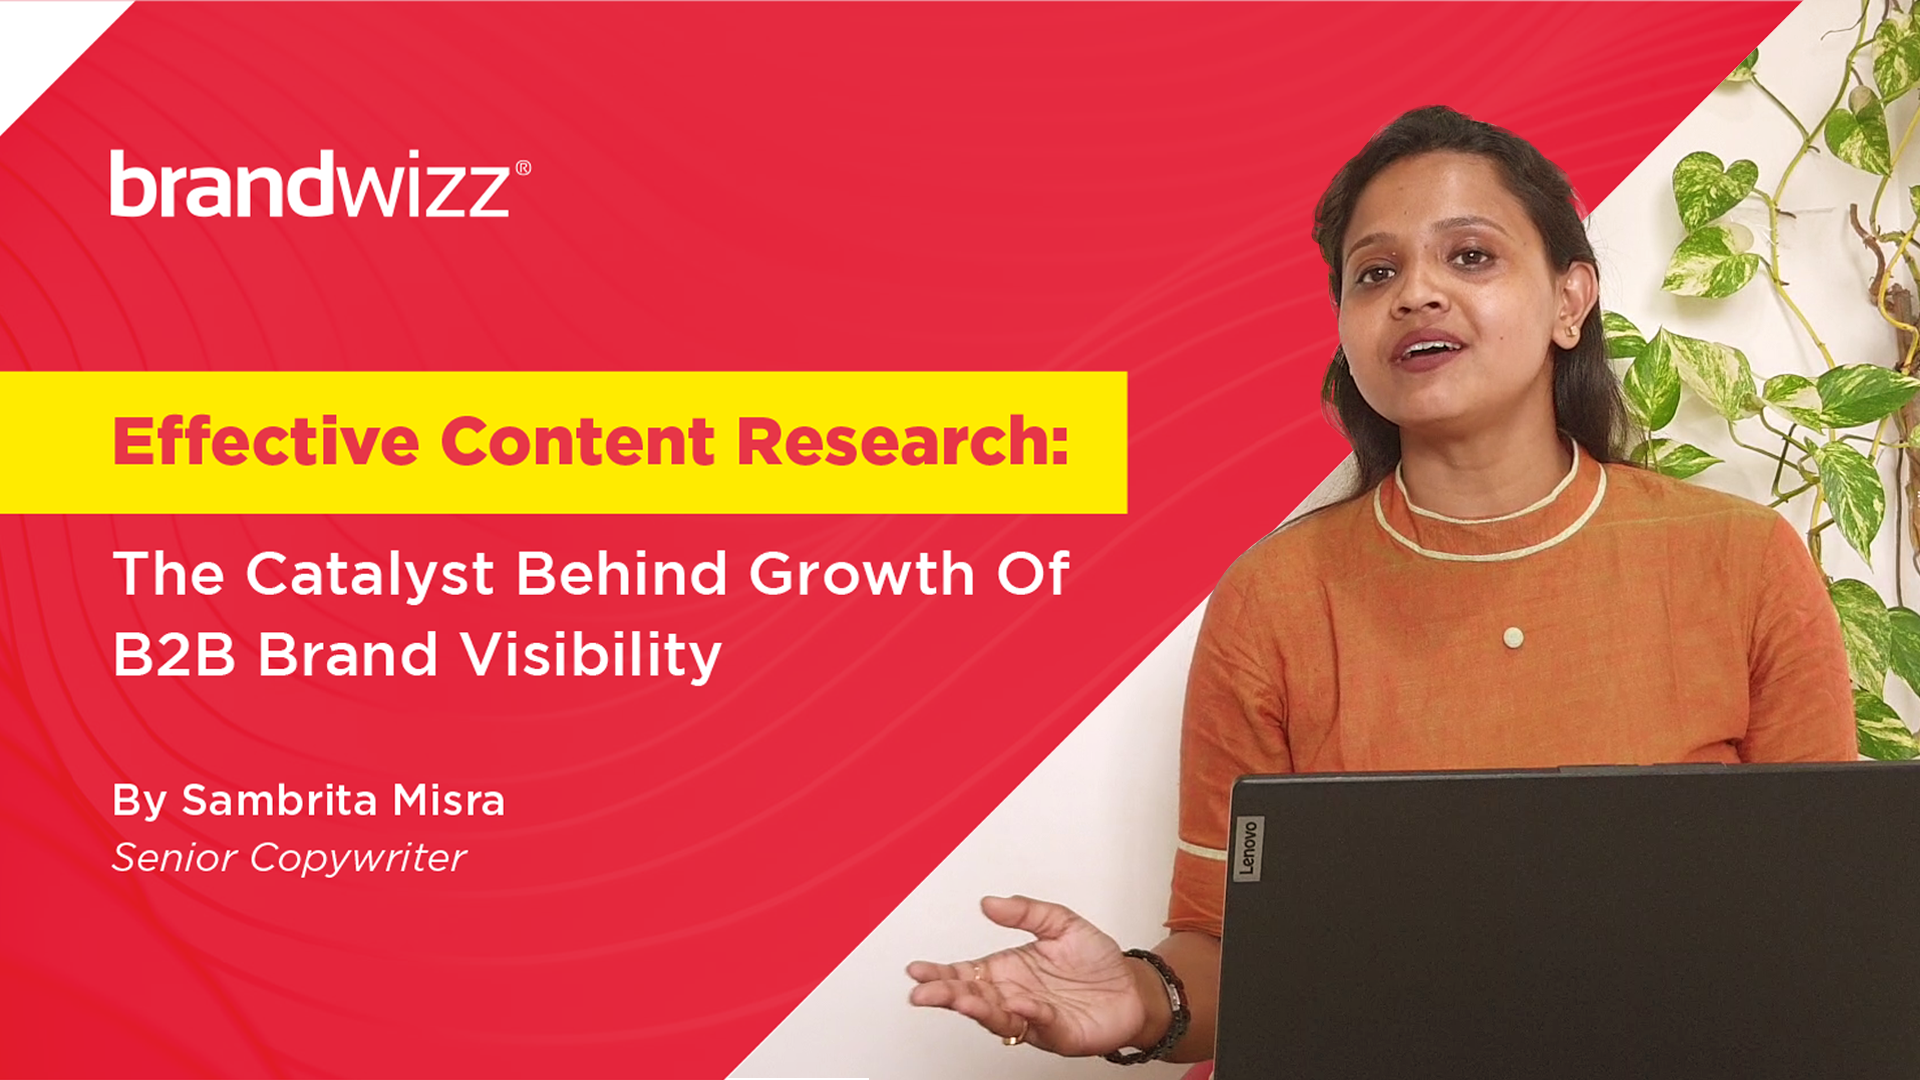 Effective Content Research: The Catalyst Behind Growth of B2B Brand Visibility